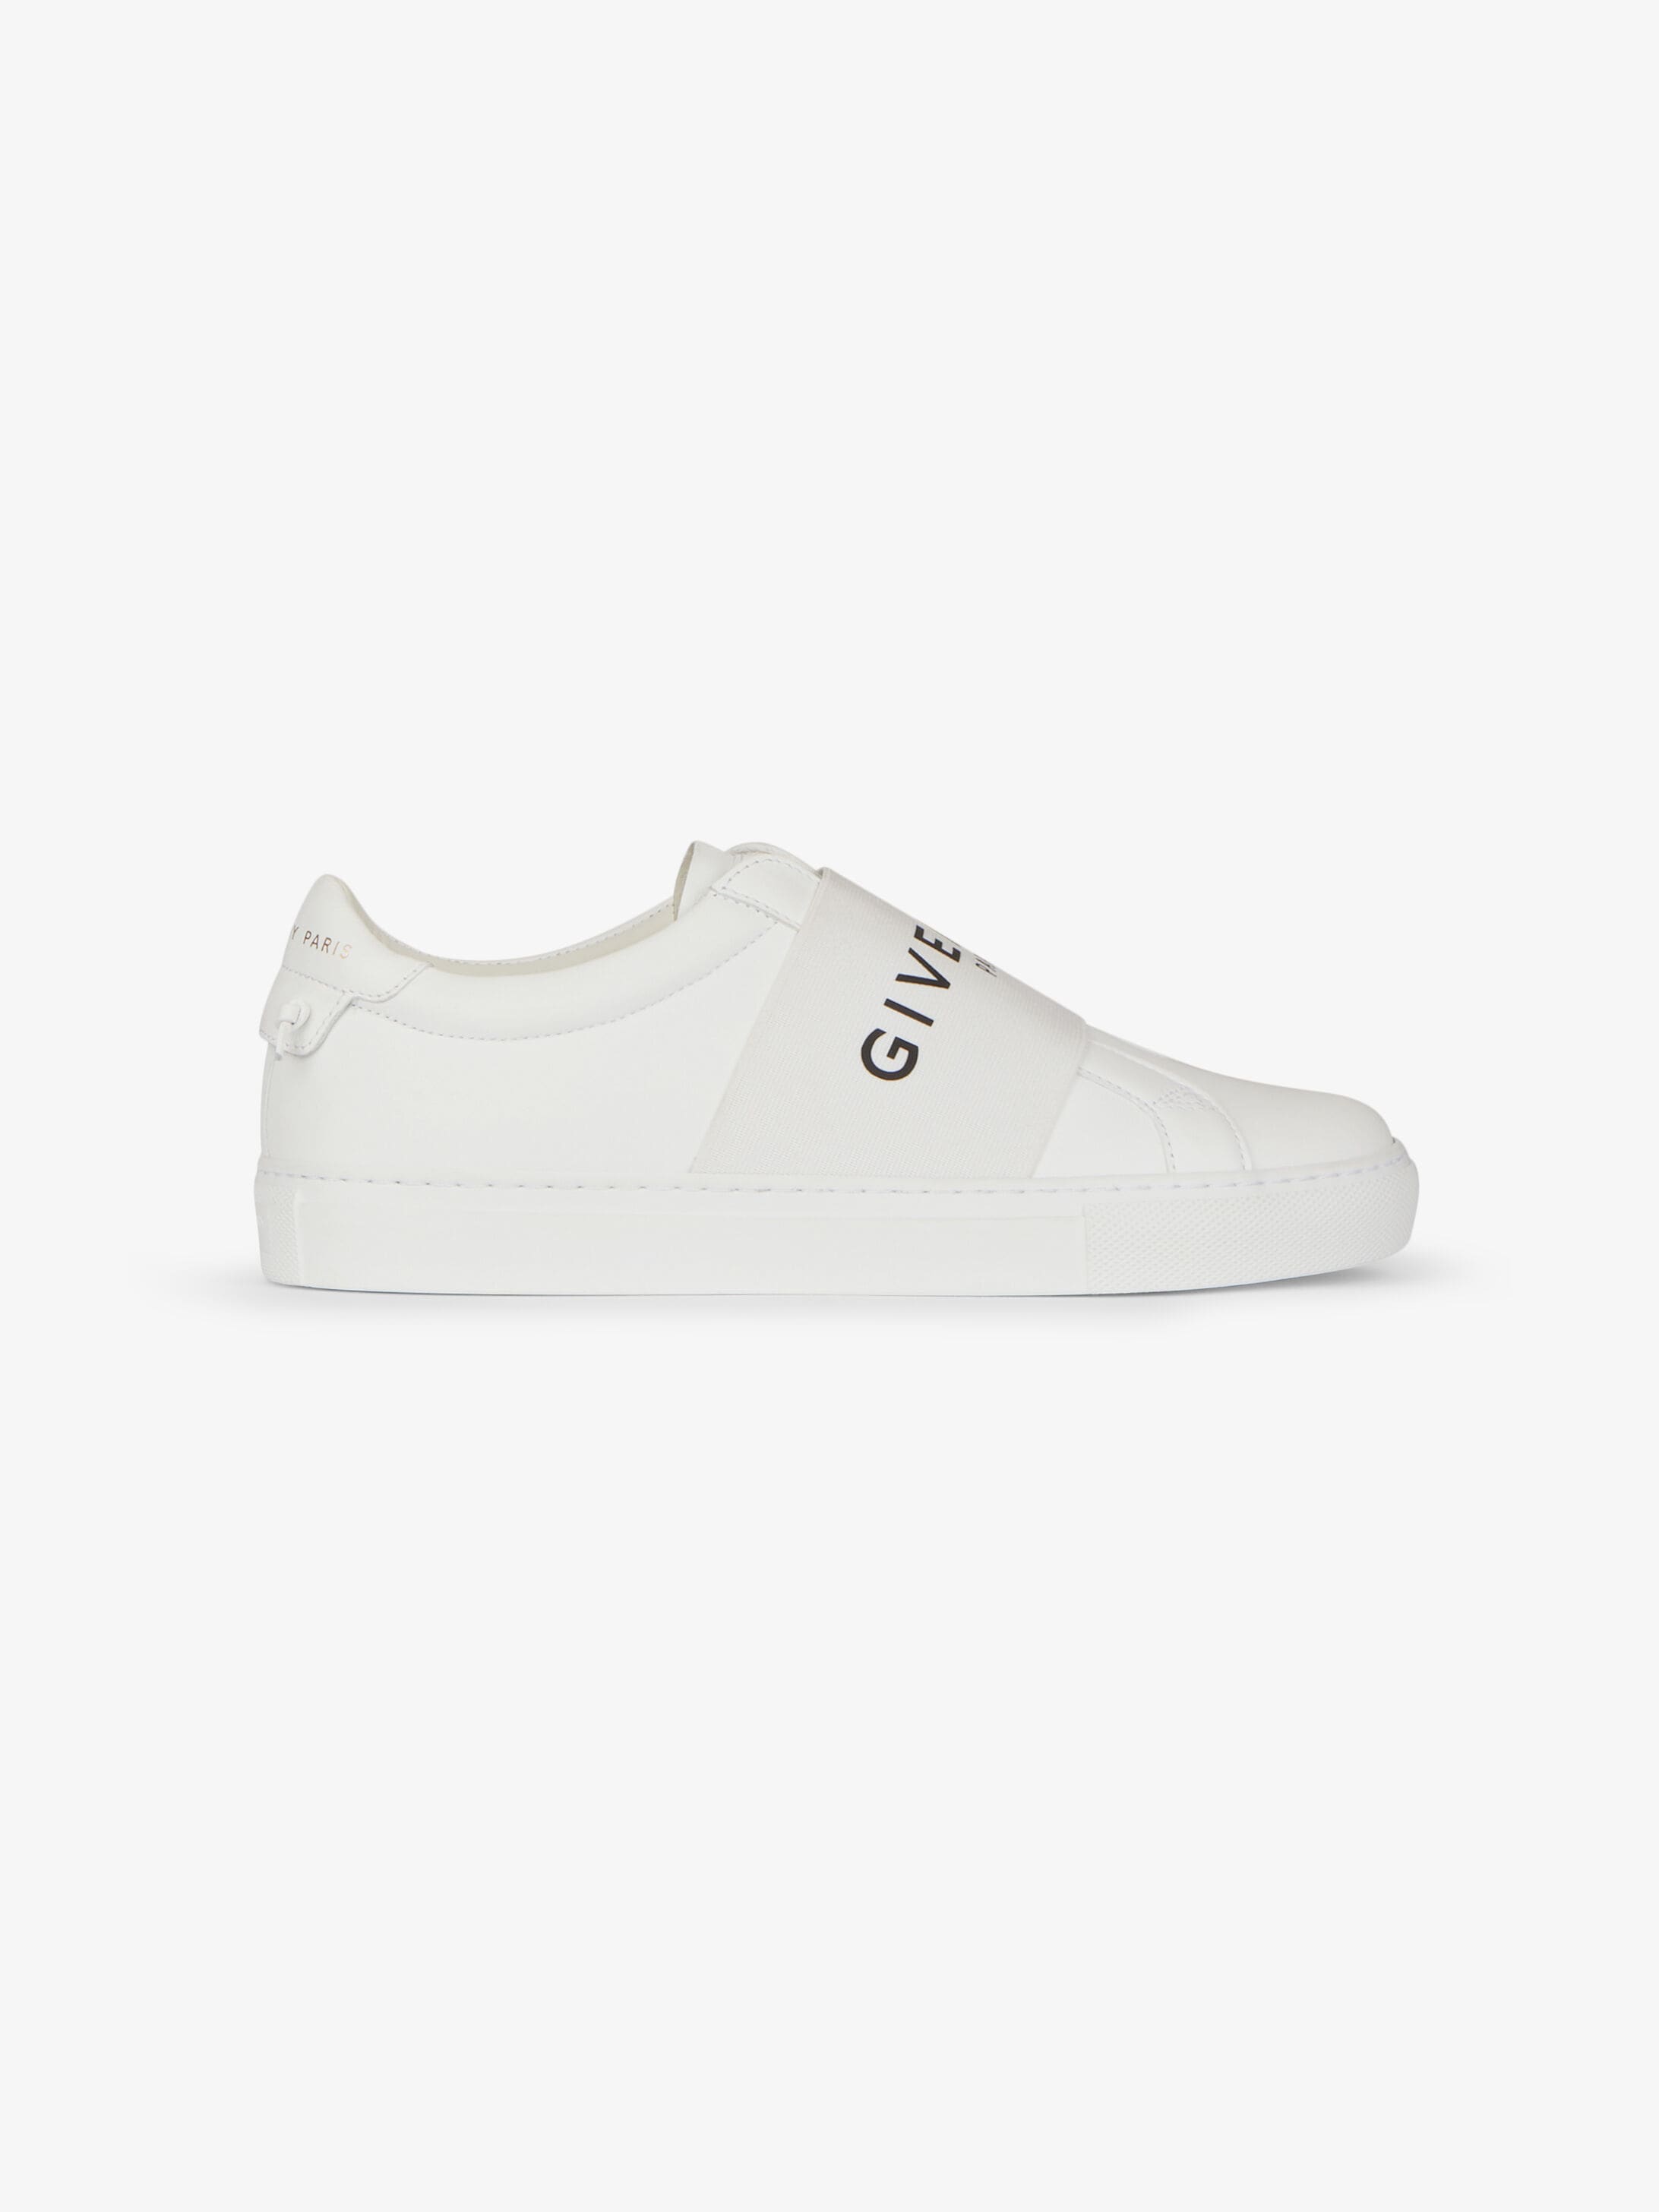 givenchy women's sneakers sale